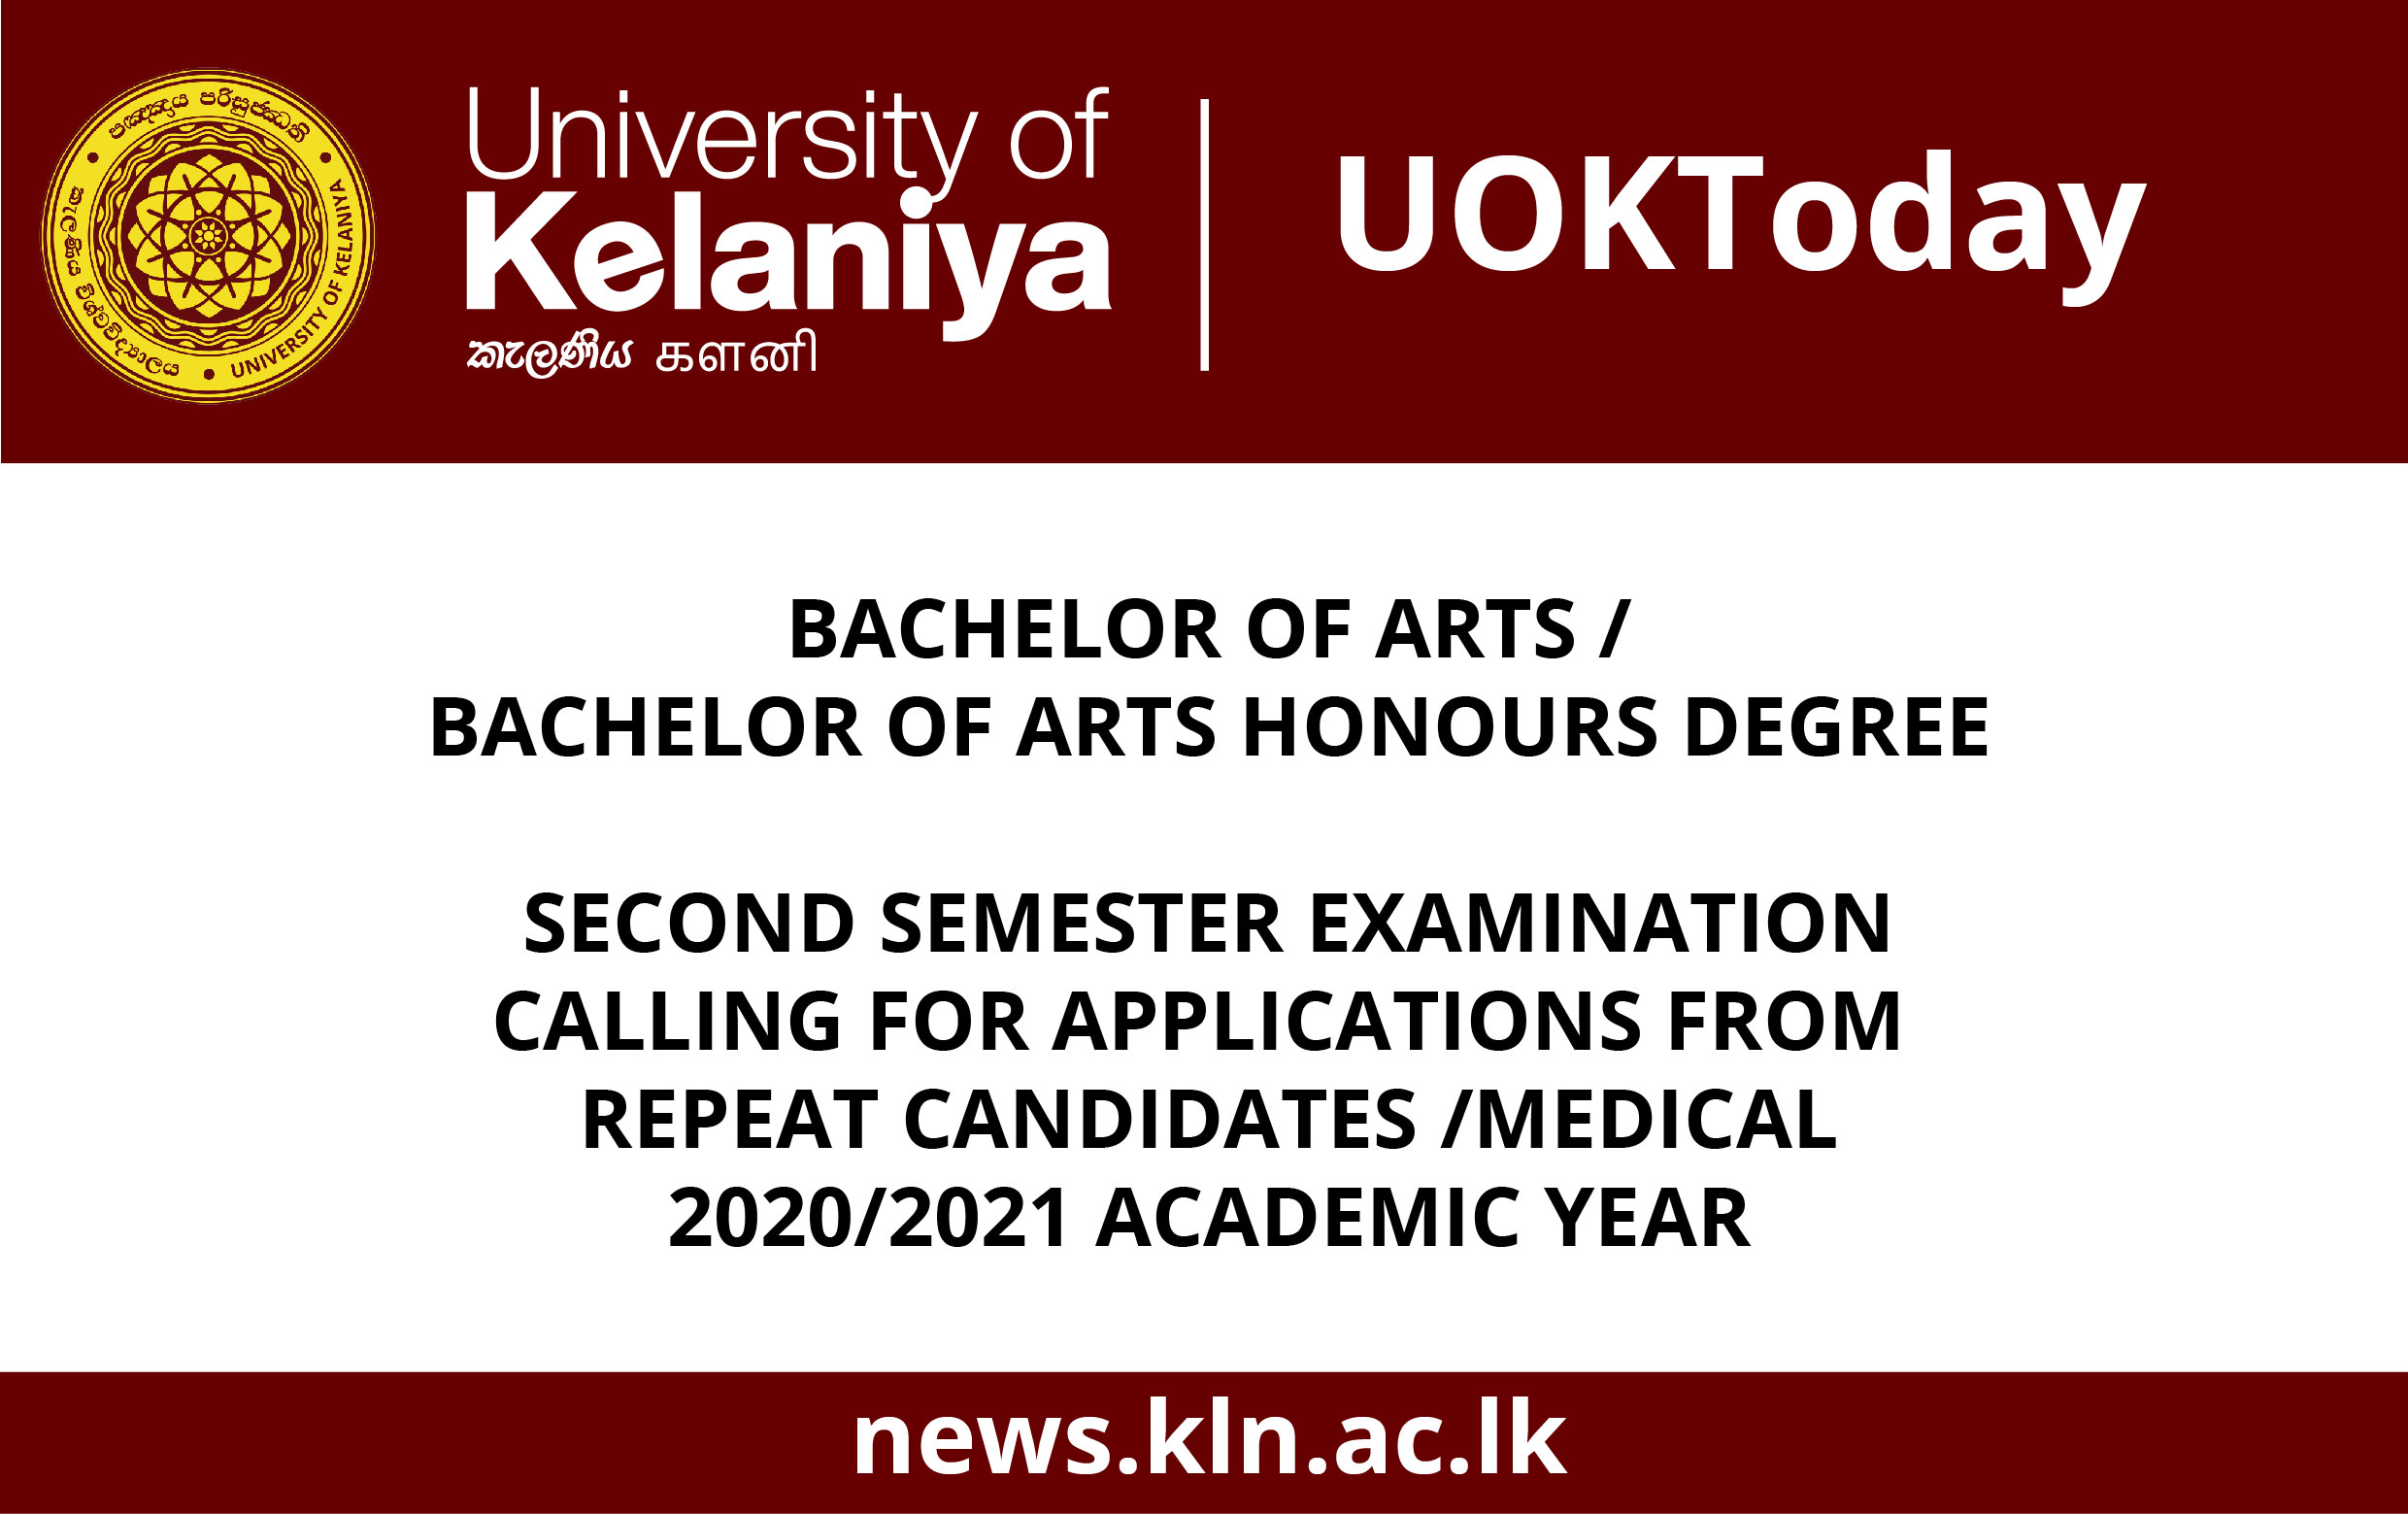 UOK Today - CALLING FOR APPLICATIONS FROM REPEAT CANDIDATES /MEDICAL ...